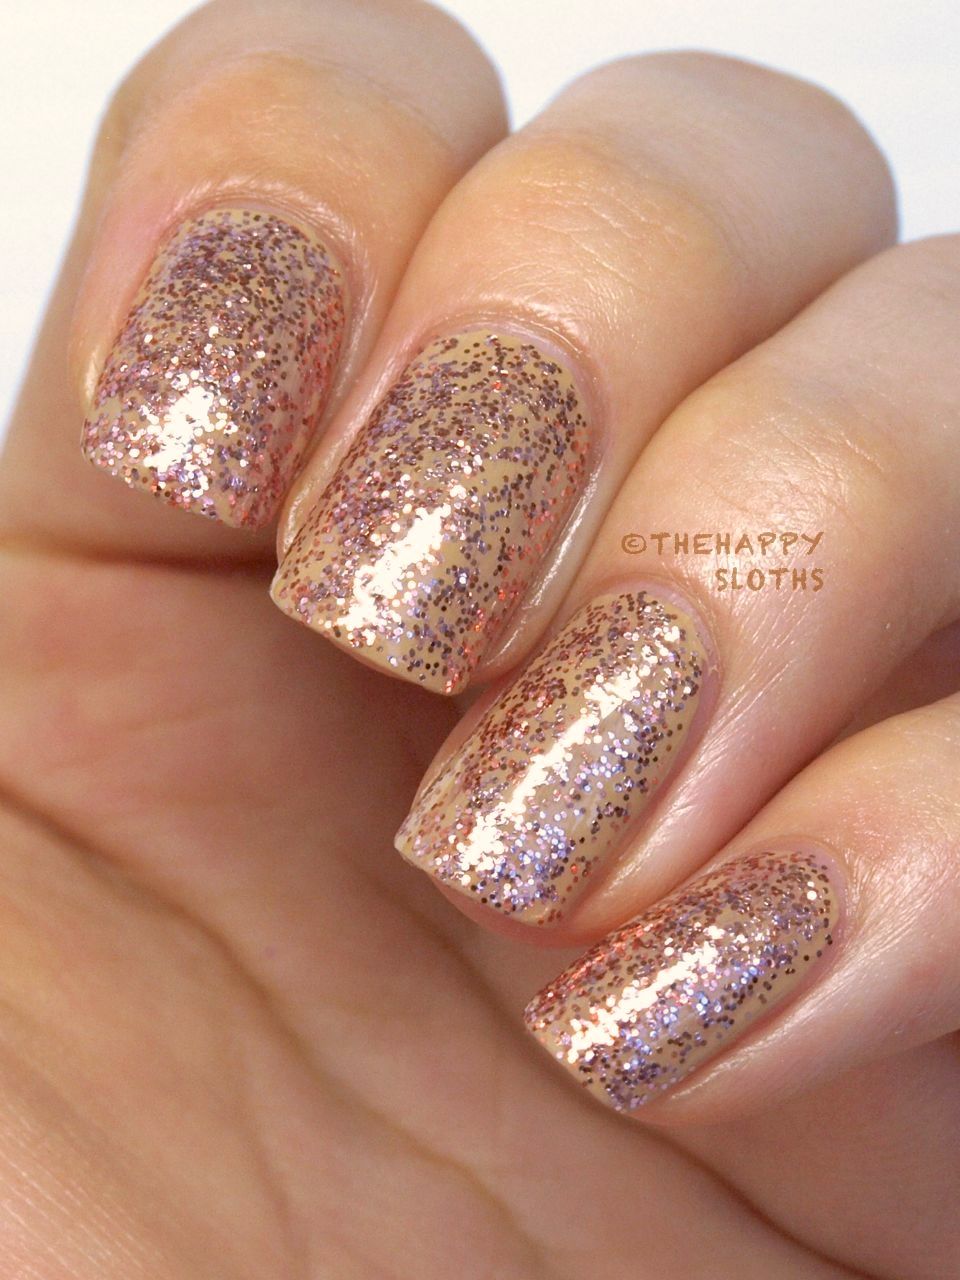 Maybelline Colorshow Glittermania Pink Champagne NOTD